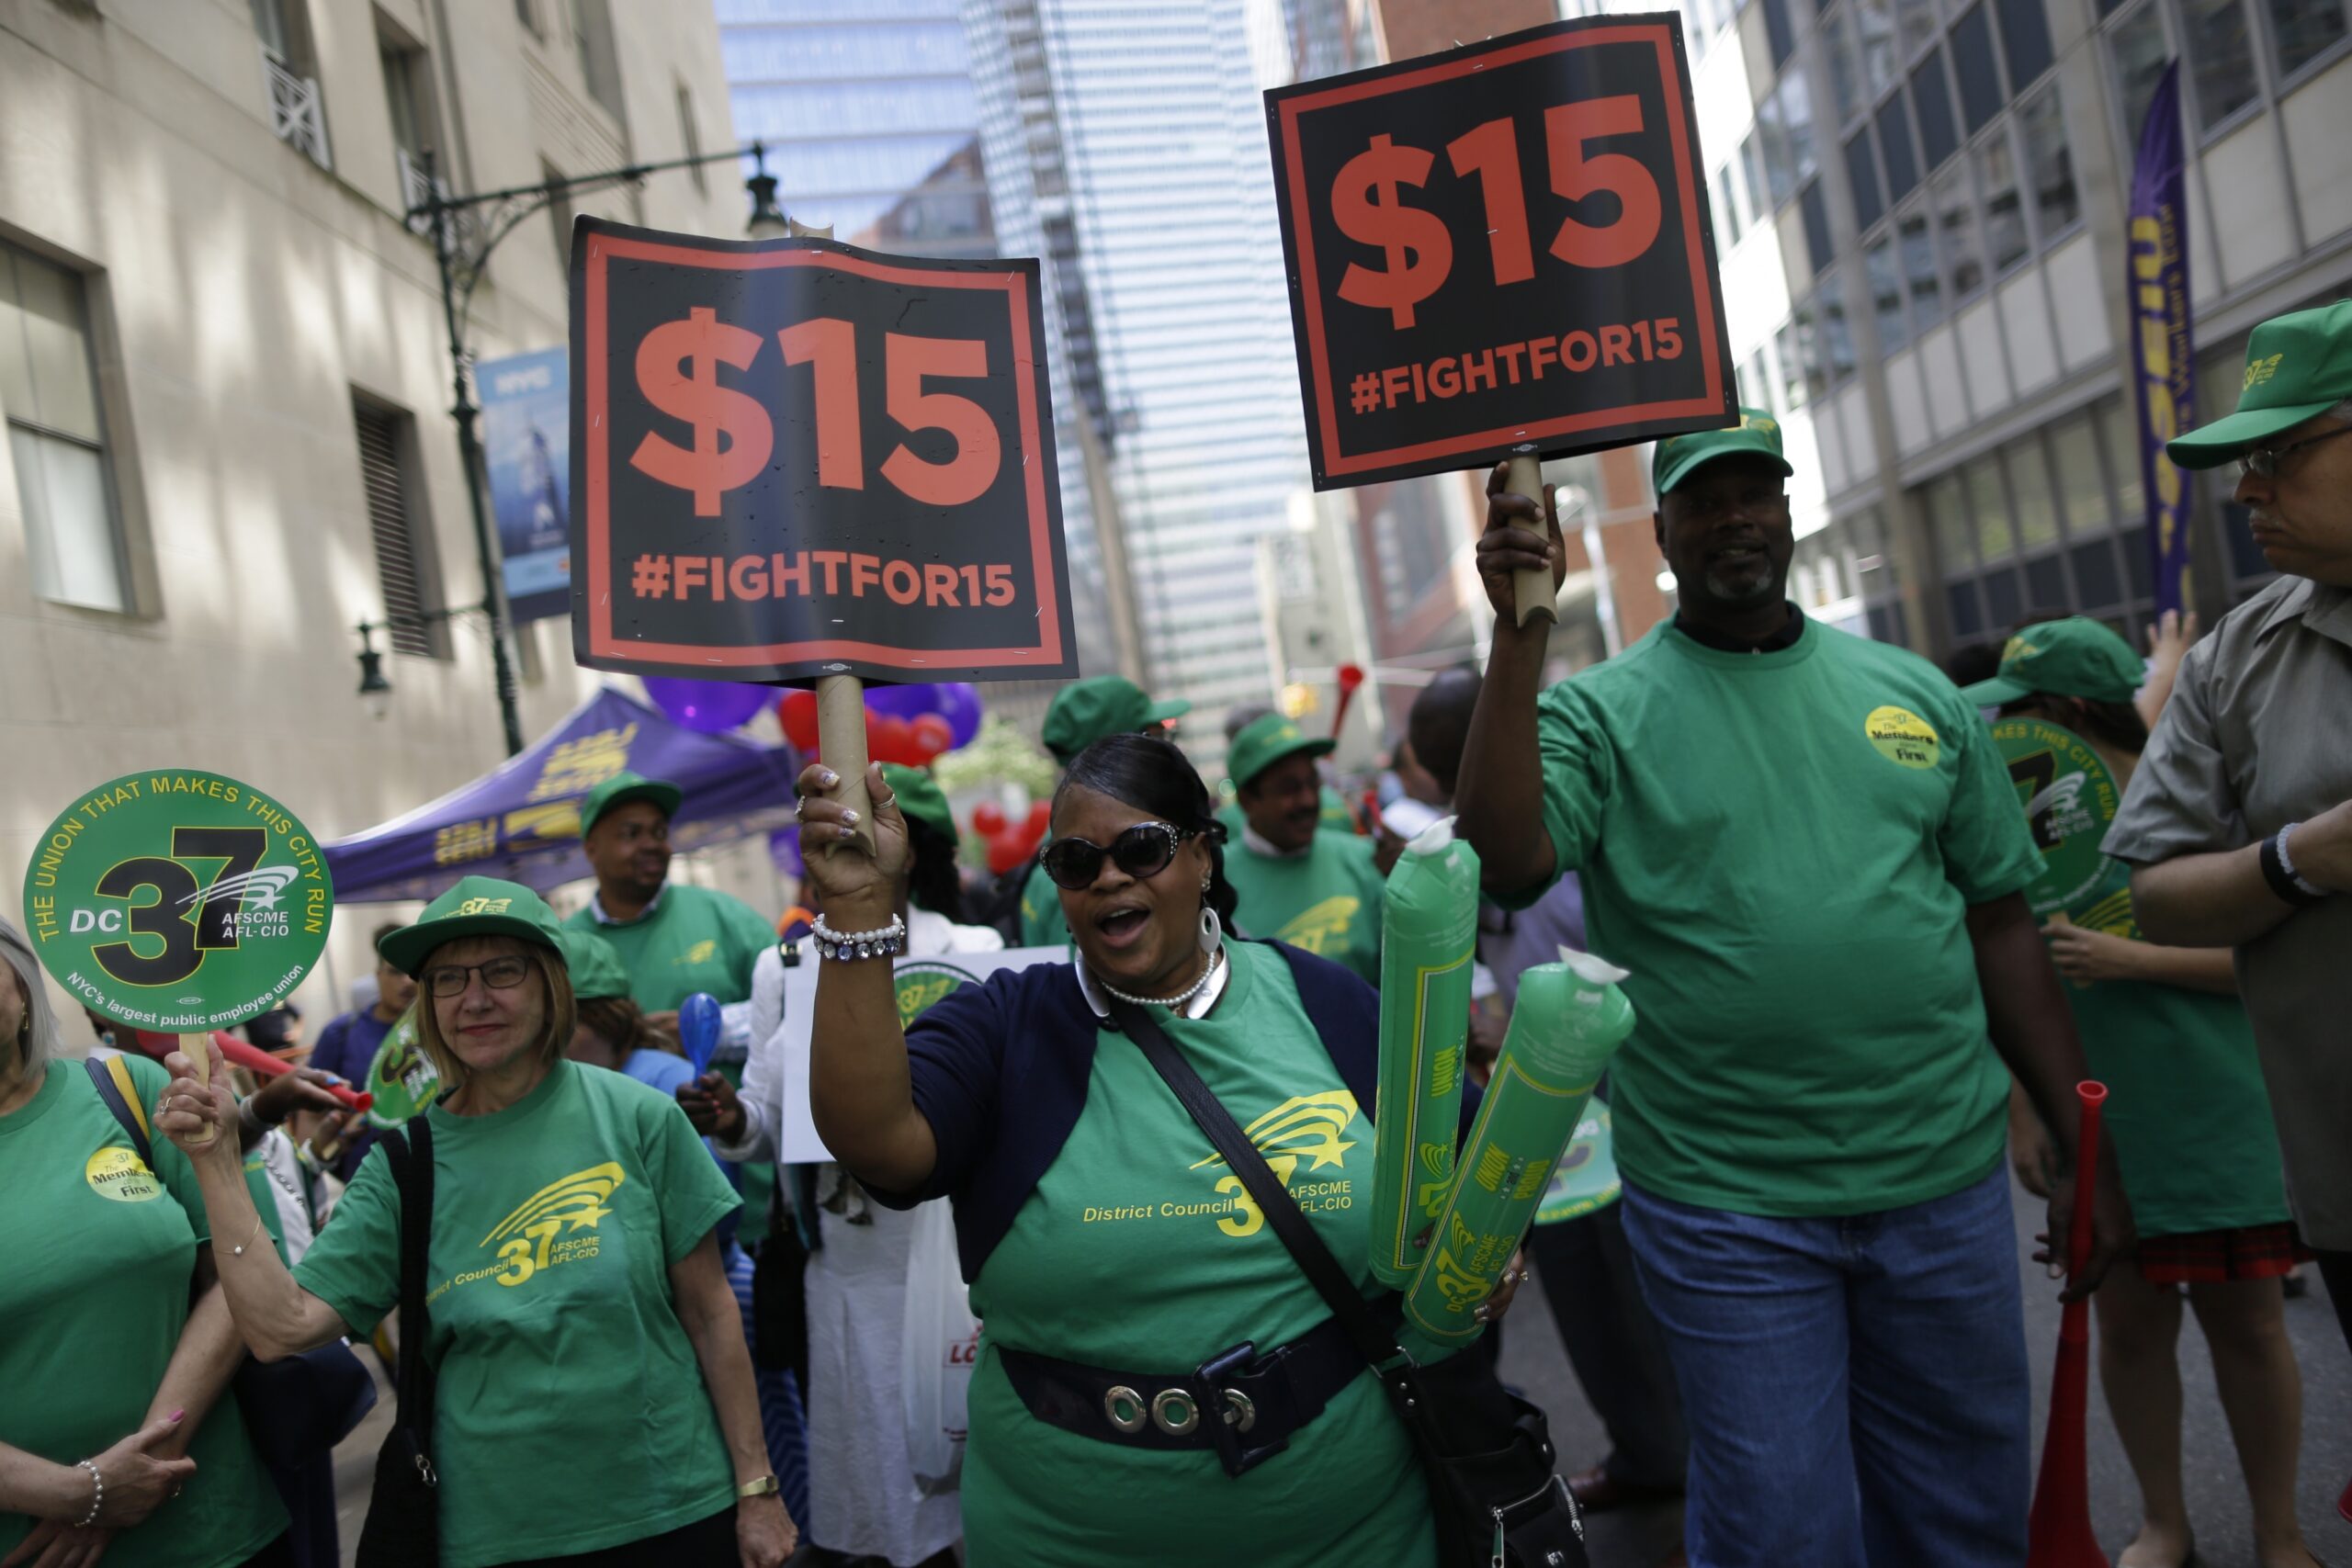 Activists hold signs in support of $15 minimum wage